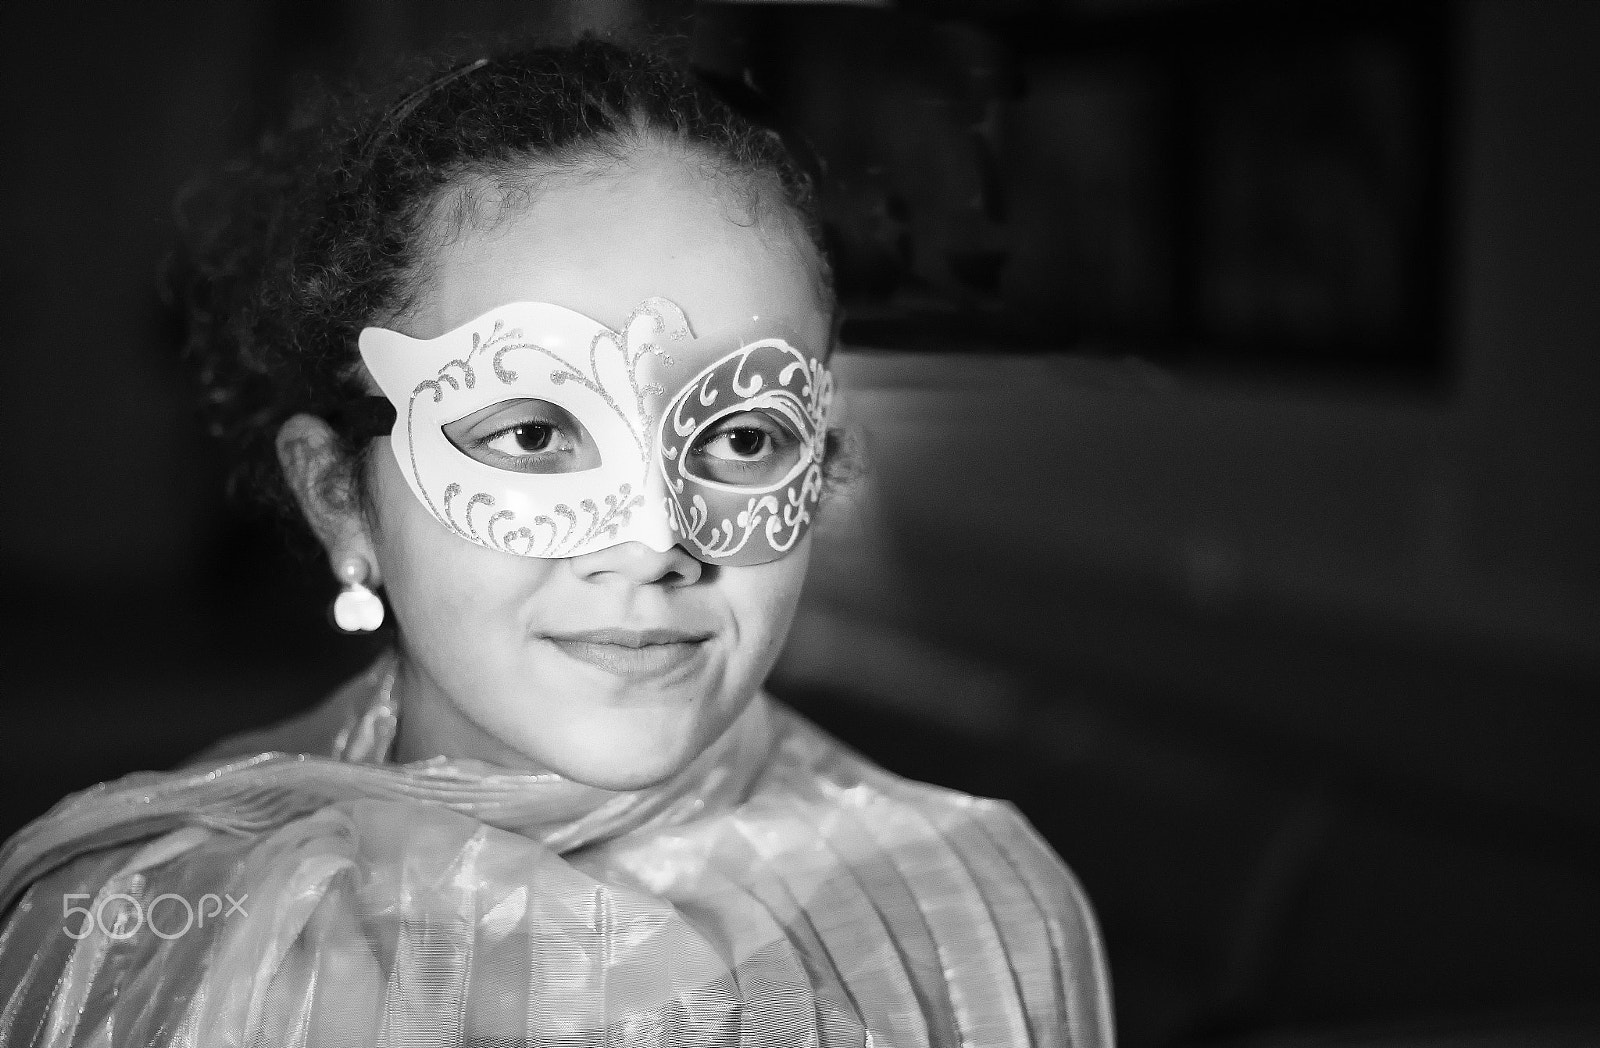 Sony a7 II sample photo. Emily and the mask photography